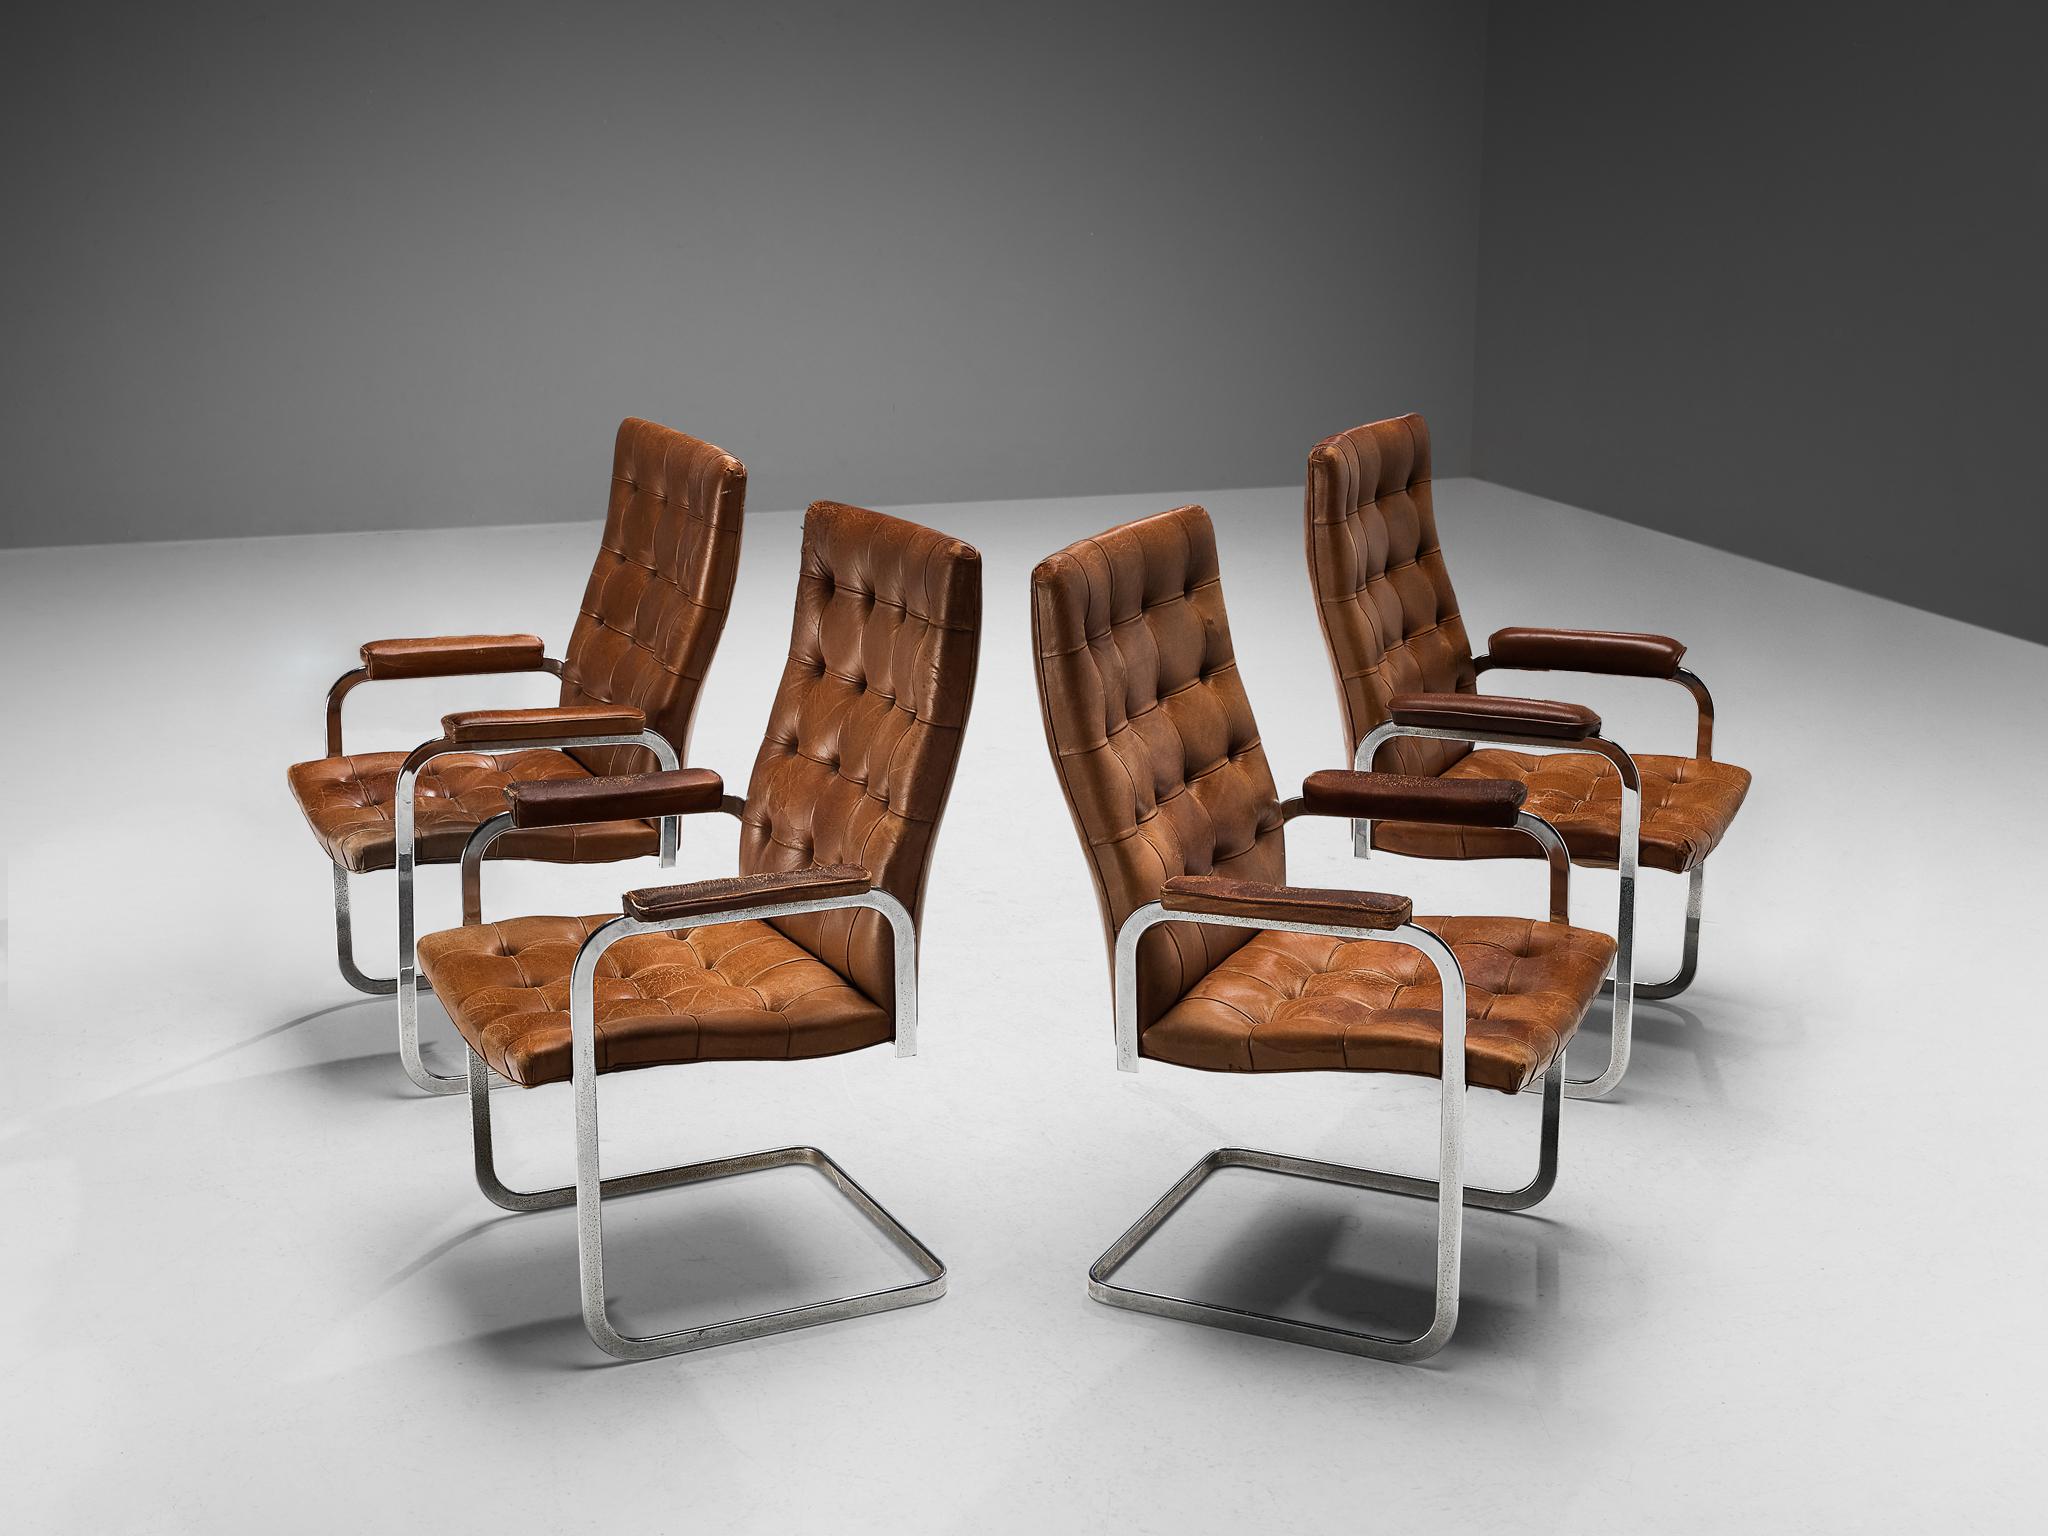 Robert Haussmann for De Sede, set of four dining chairs, model 'RH-304', leather, chrome-plated steel, Switzerland, ca. 1950. 

This cantilevered set of tufted chairs with leather padded armrests is designed by Robert Haussmann for De Sede. The set